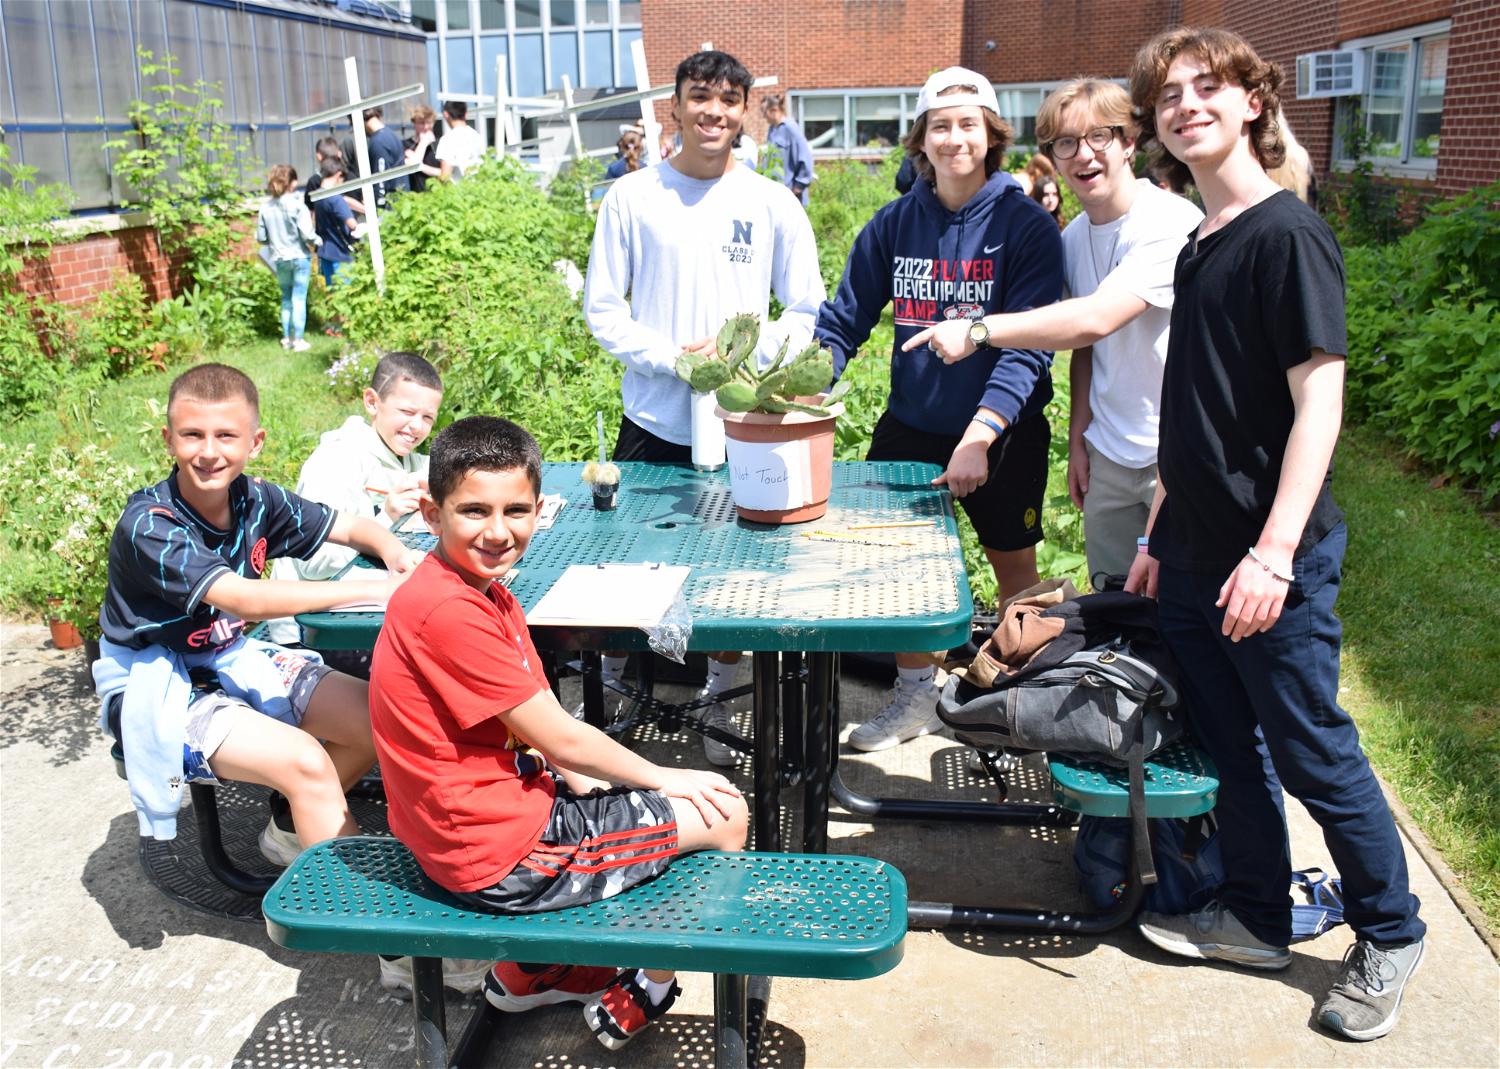 Students in David LaMagna’s Advanced Placement Environmental Science class with fourth grade students at the high school. Photo courtesy of the Northport-East Northport UFSD.